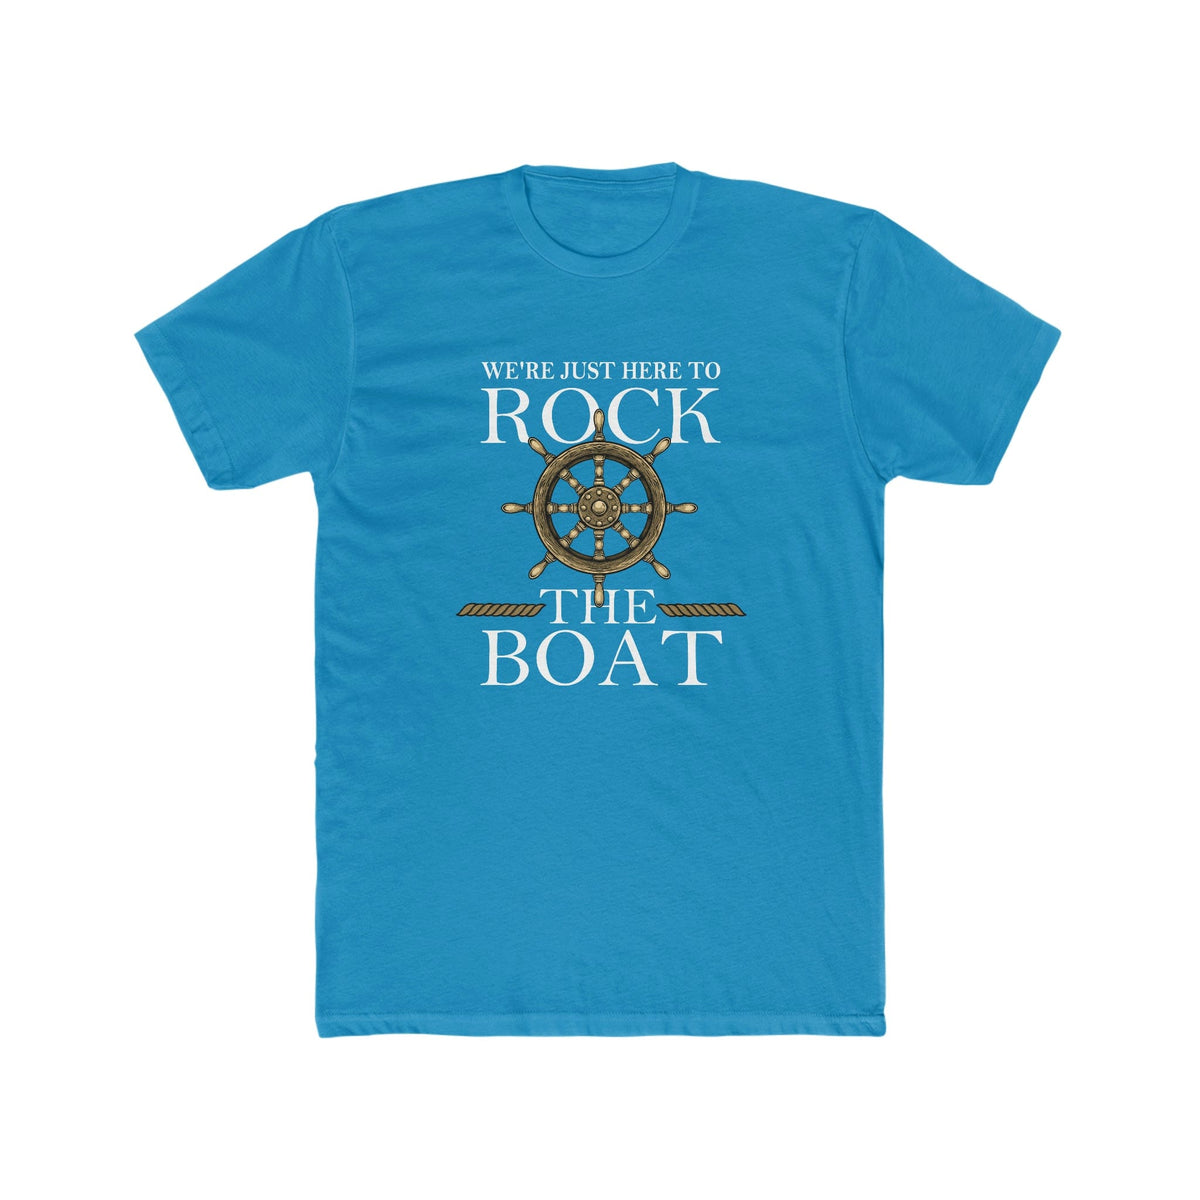 We Just Here To Rock The Boat Deluxe Unisex Shirt